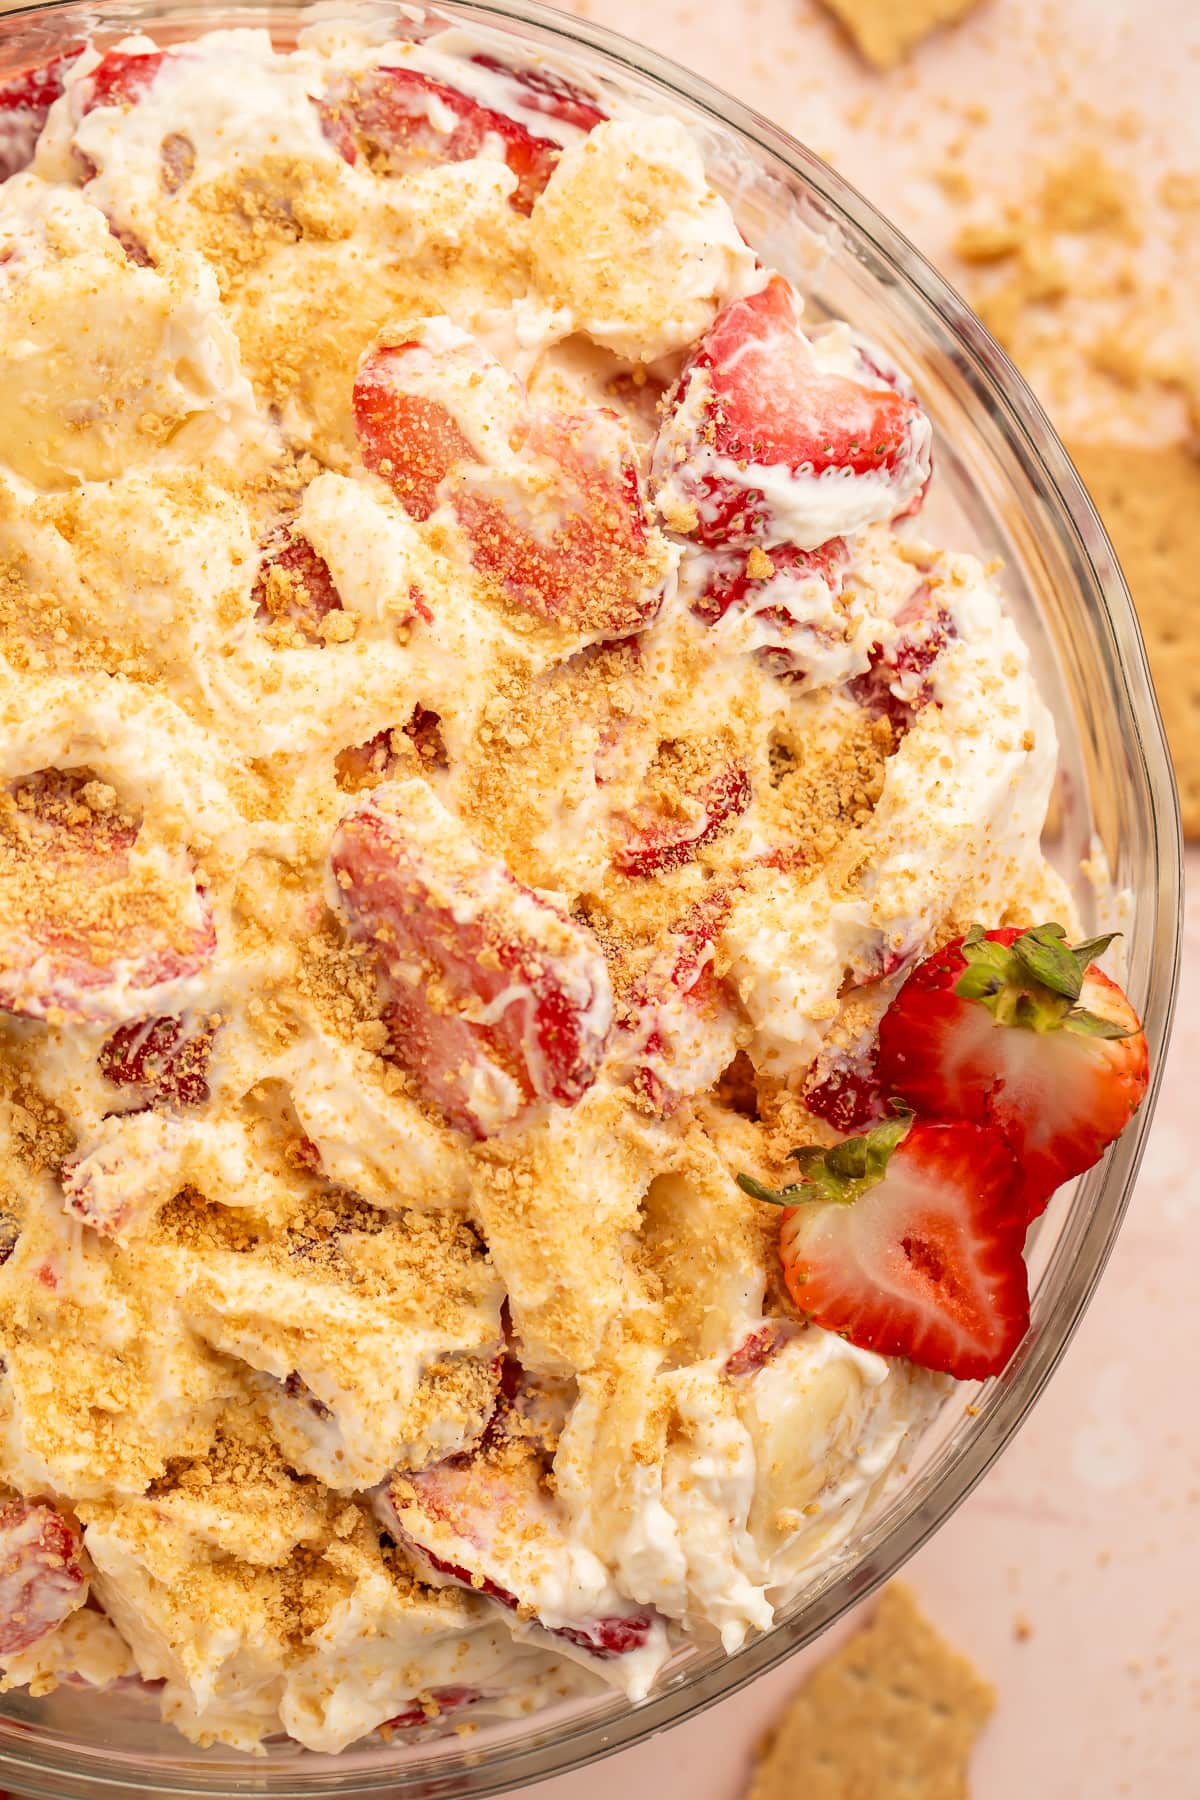 A large glass mixing bowl filled with thick, creamy cheesecake salad topped with sliced strawberries and bananas and crumbled graham crackers.